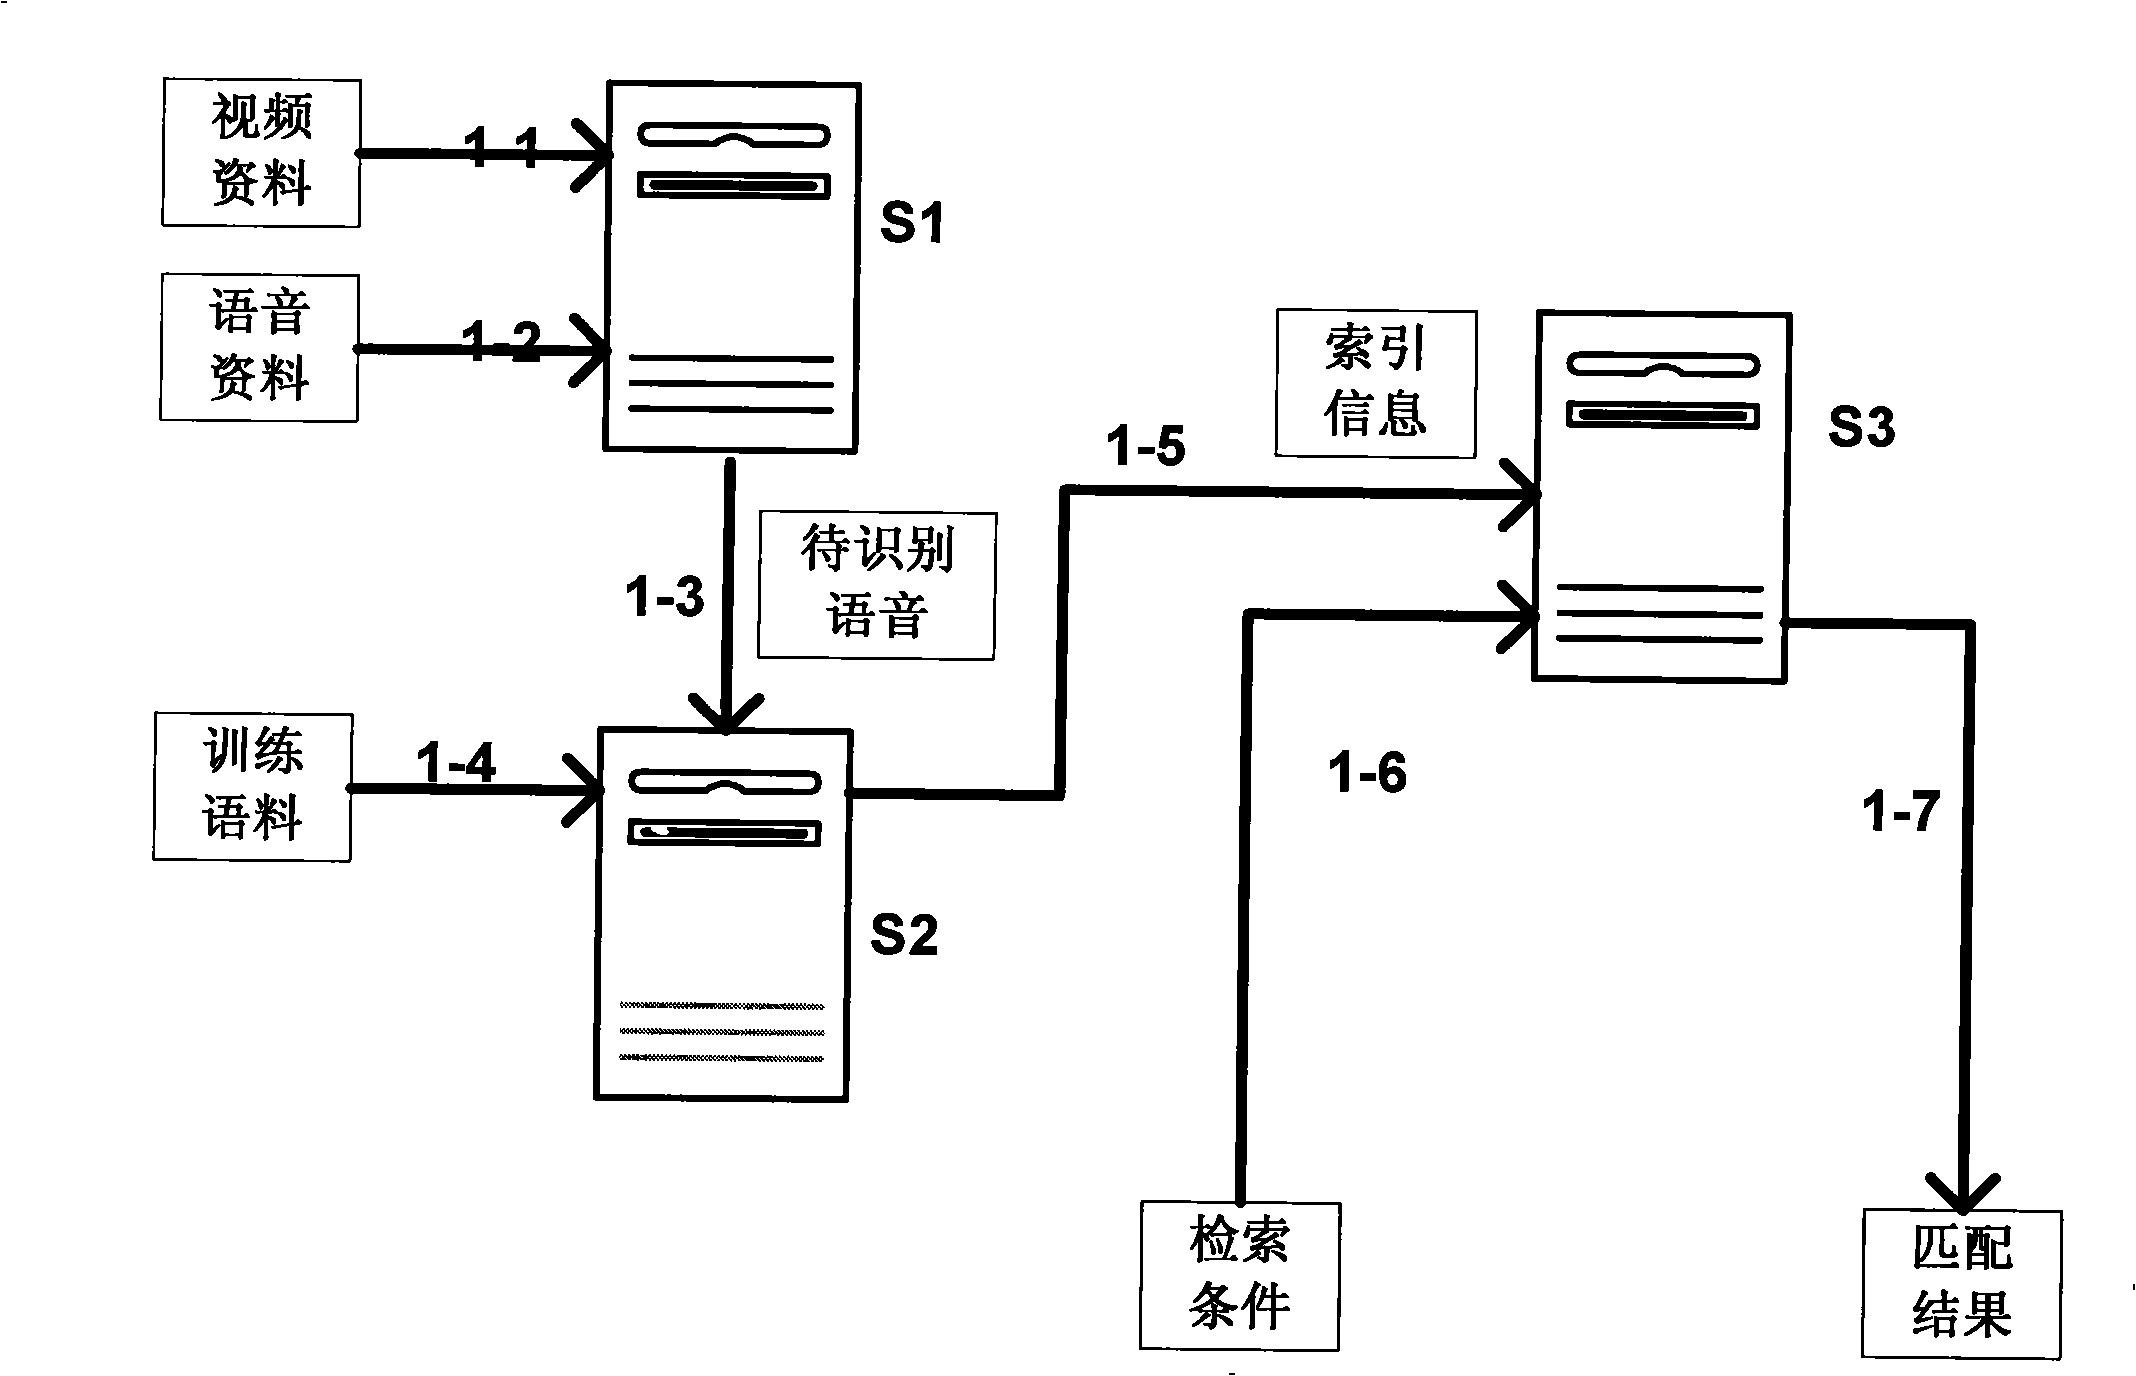 Method for searching multimedia resource based on audio content retrieval